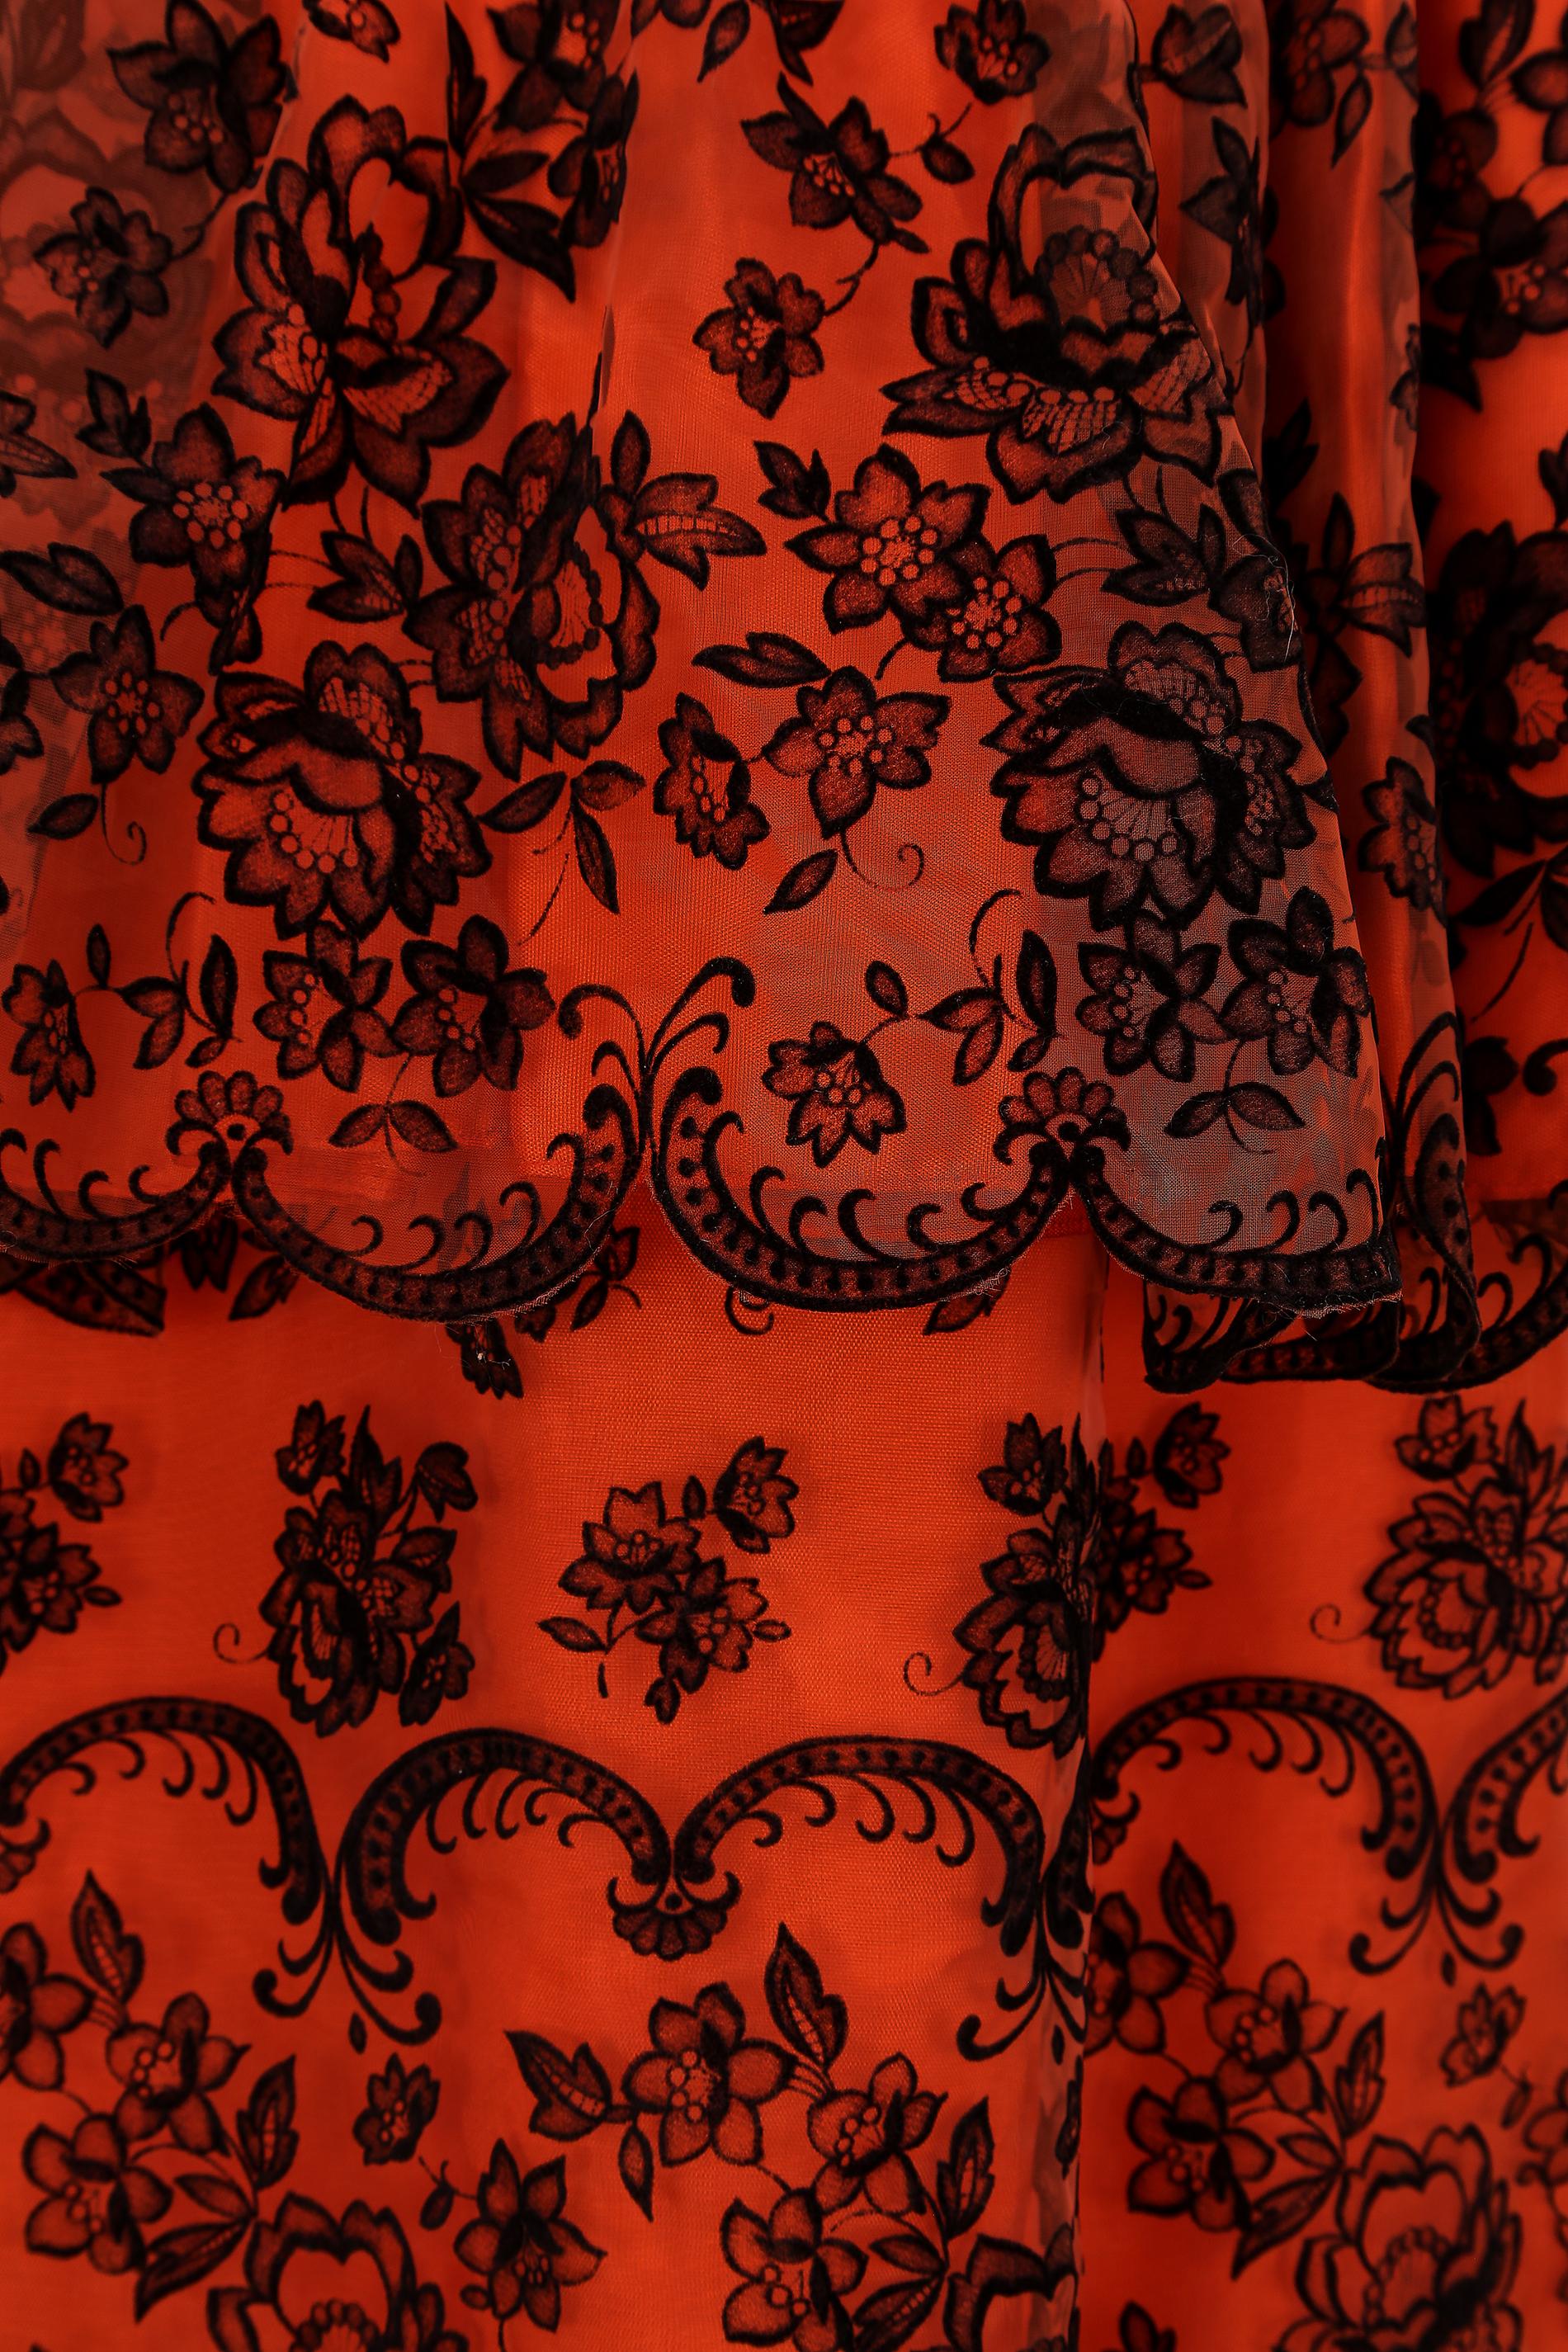 1960s Diana Floral Black and Orange Flock Print Dress In Excellent Condition For Sale In London, GB